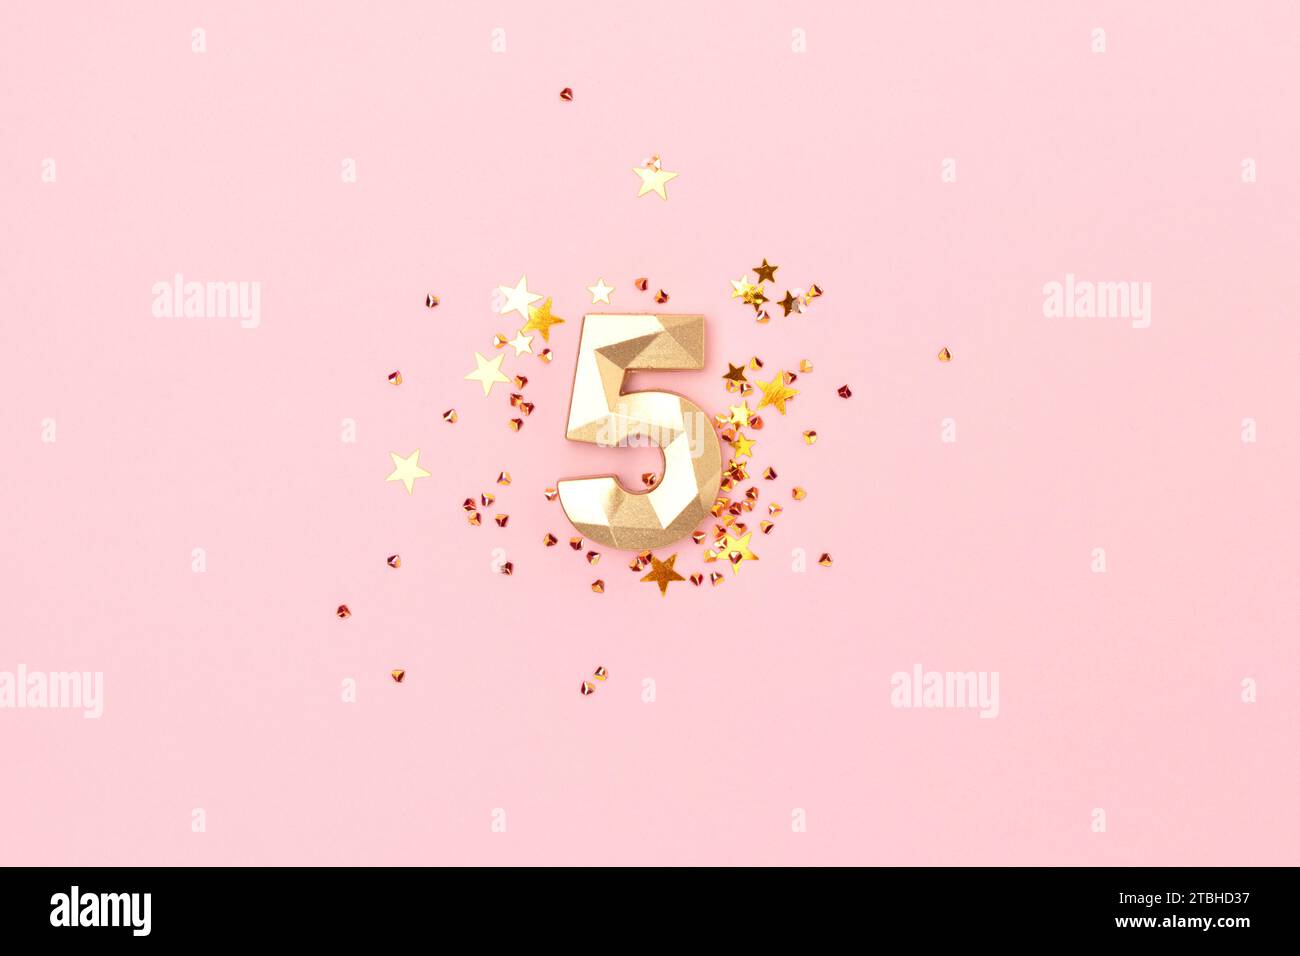 Golden number five and stars confetti on a pink background. Festive creative concept. Stock Photo